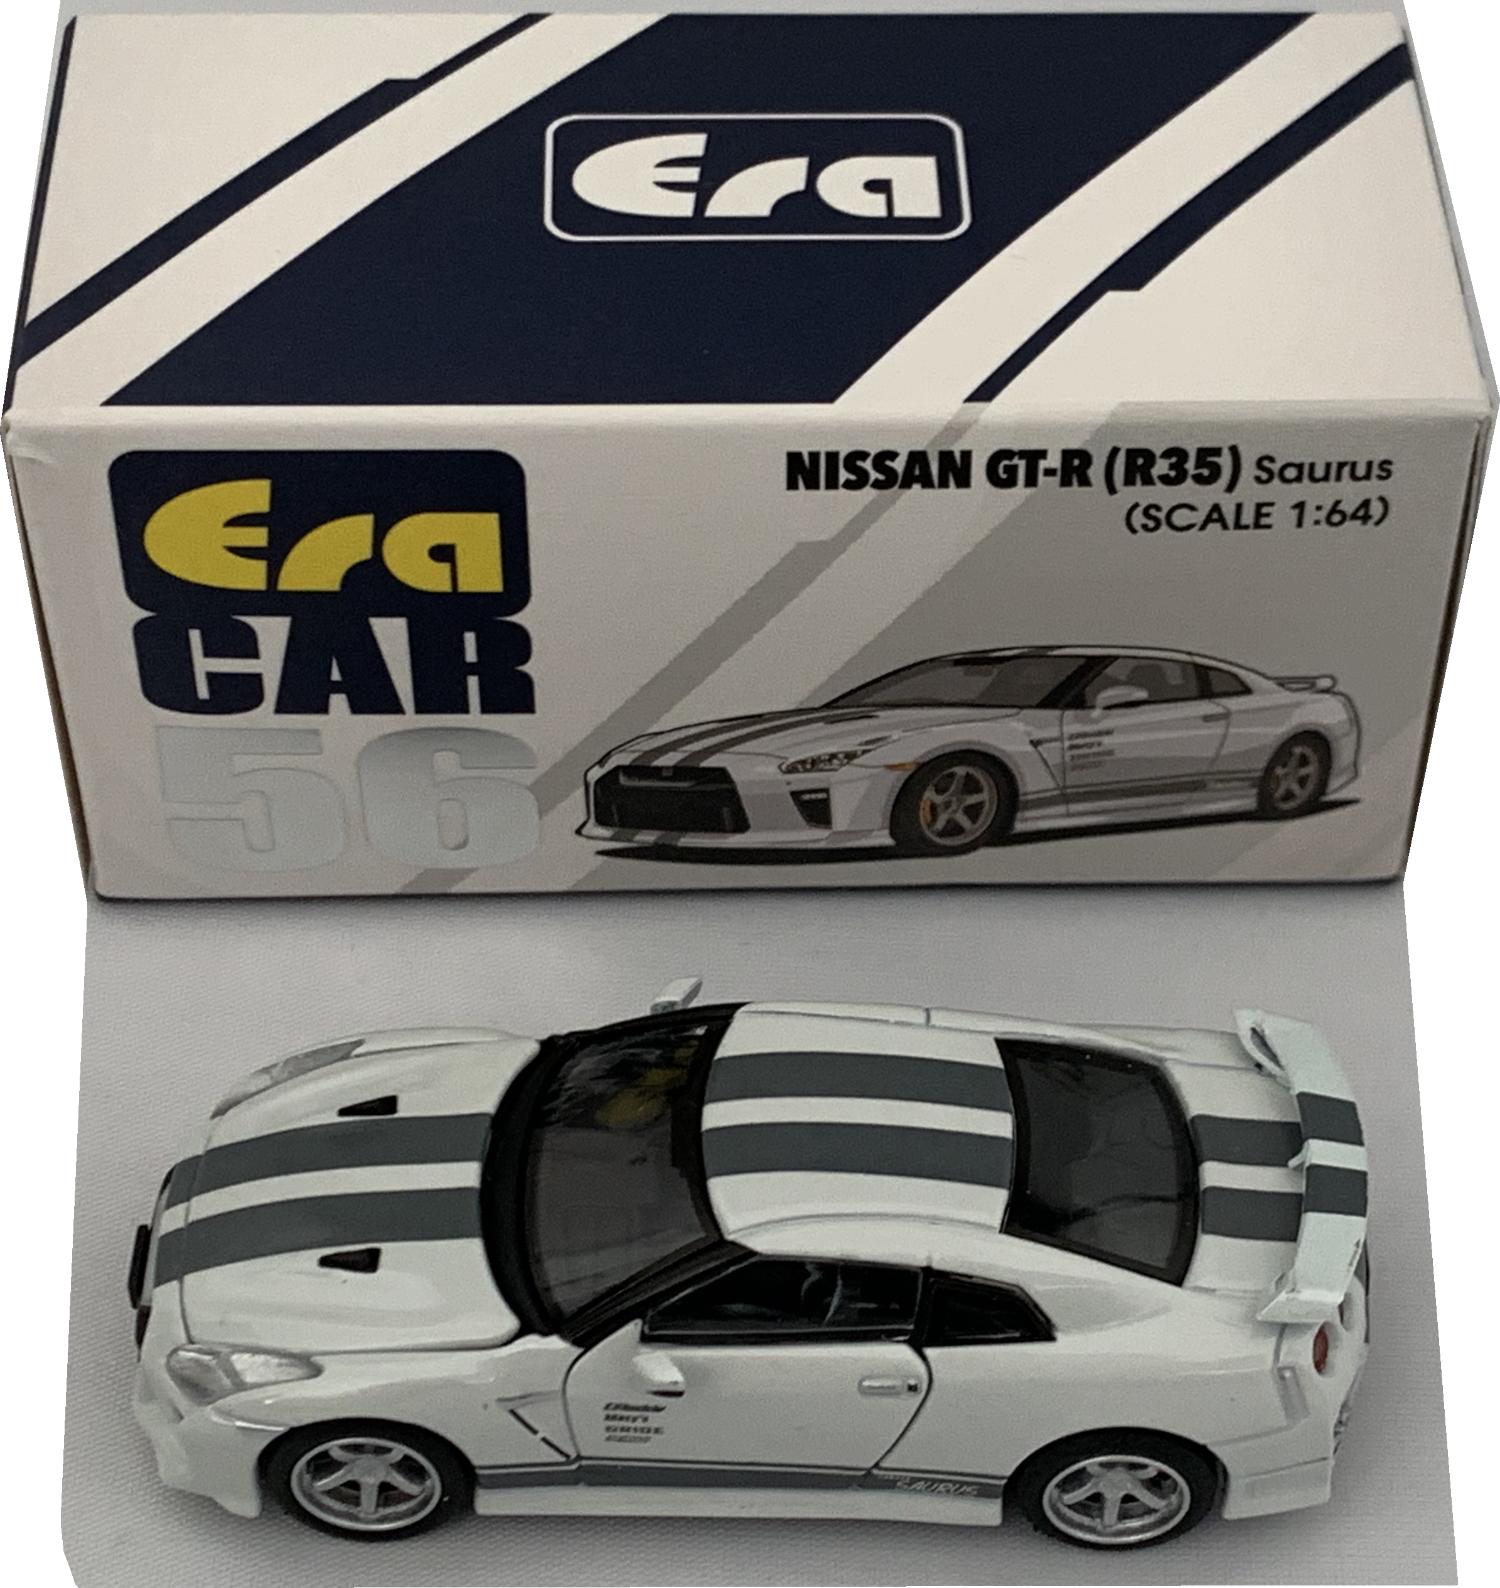 A good reproduction of the Nissan GT-R (R35) with detail throughout, all authentically recreated.  The model is presented in a box, the car is approx. 7.5 cm long and the box is 9 cm long